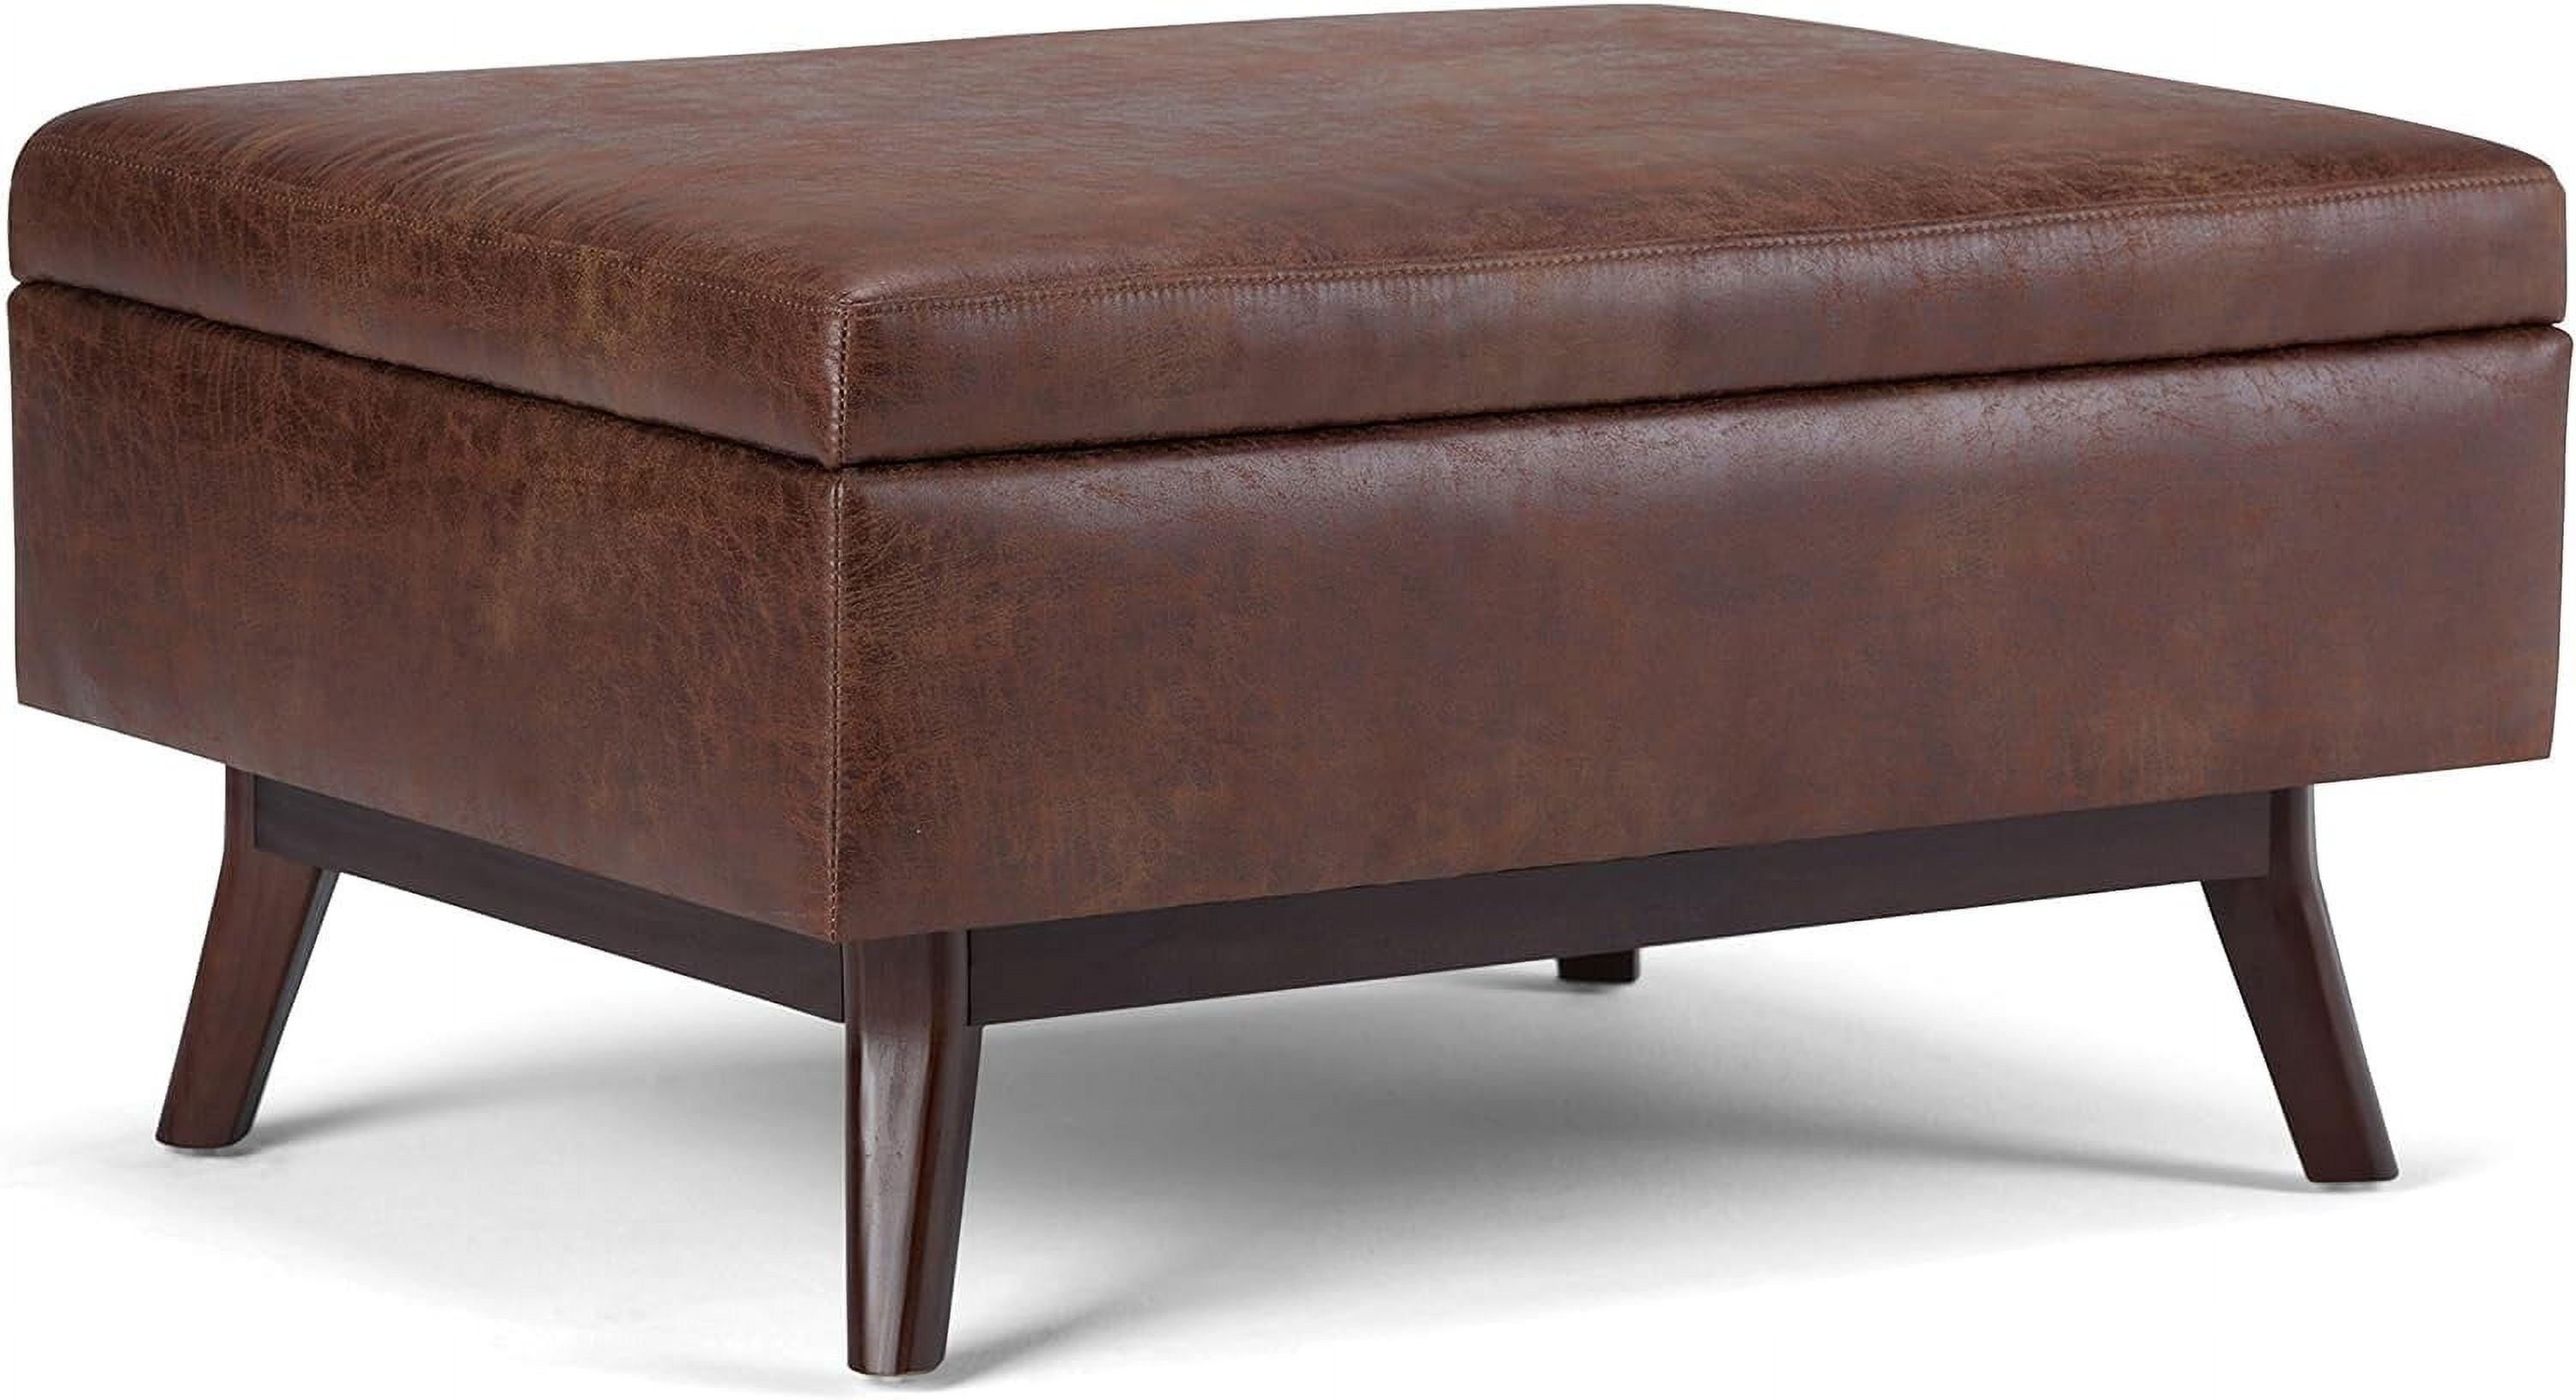 Distressed Saddle Brown Wood Storage Ottoman with Hydraulic Lift